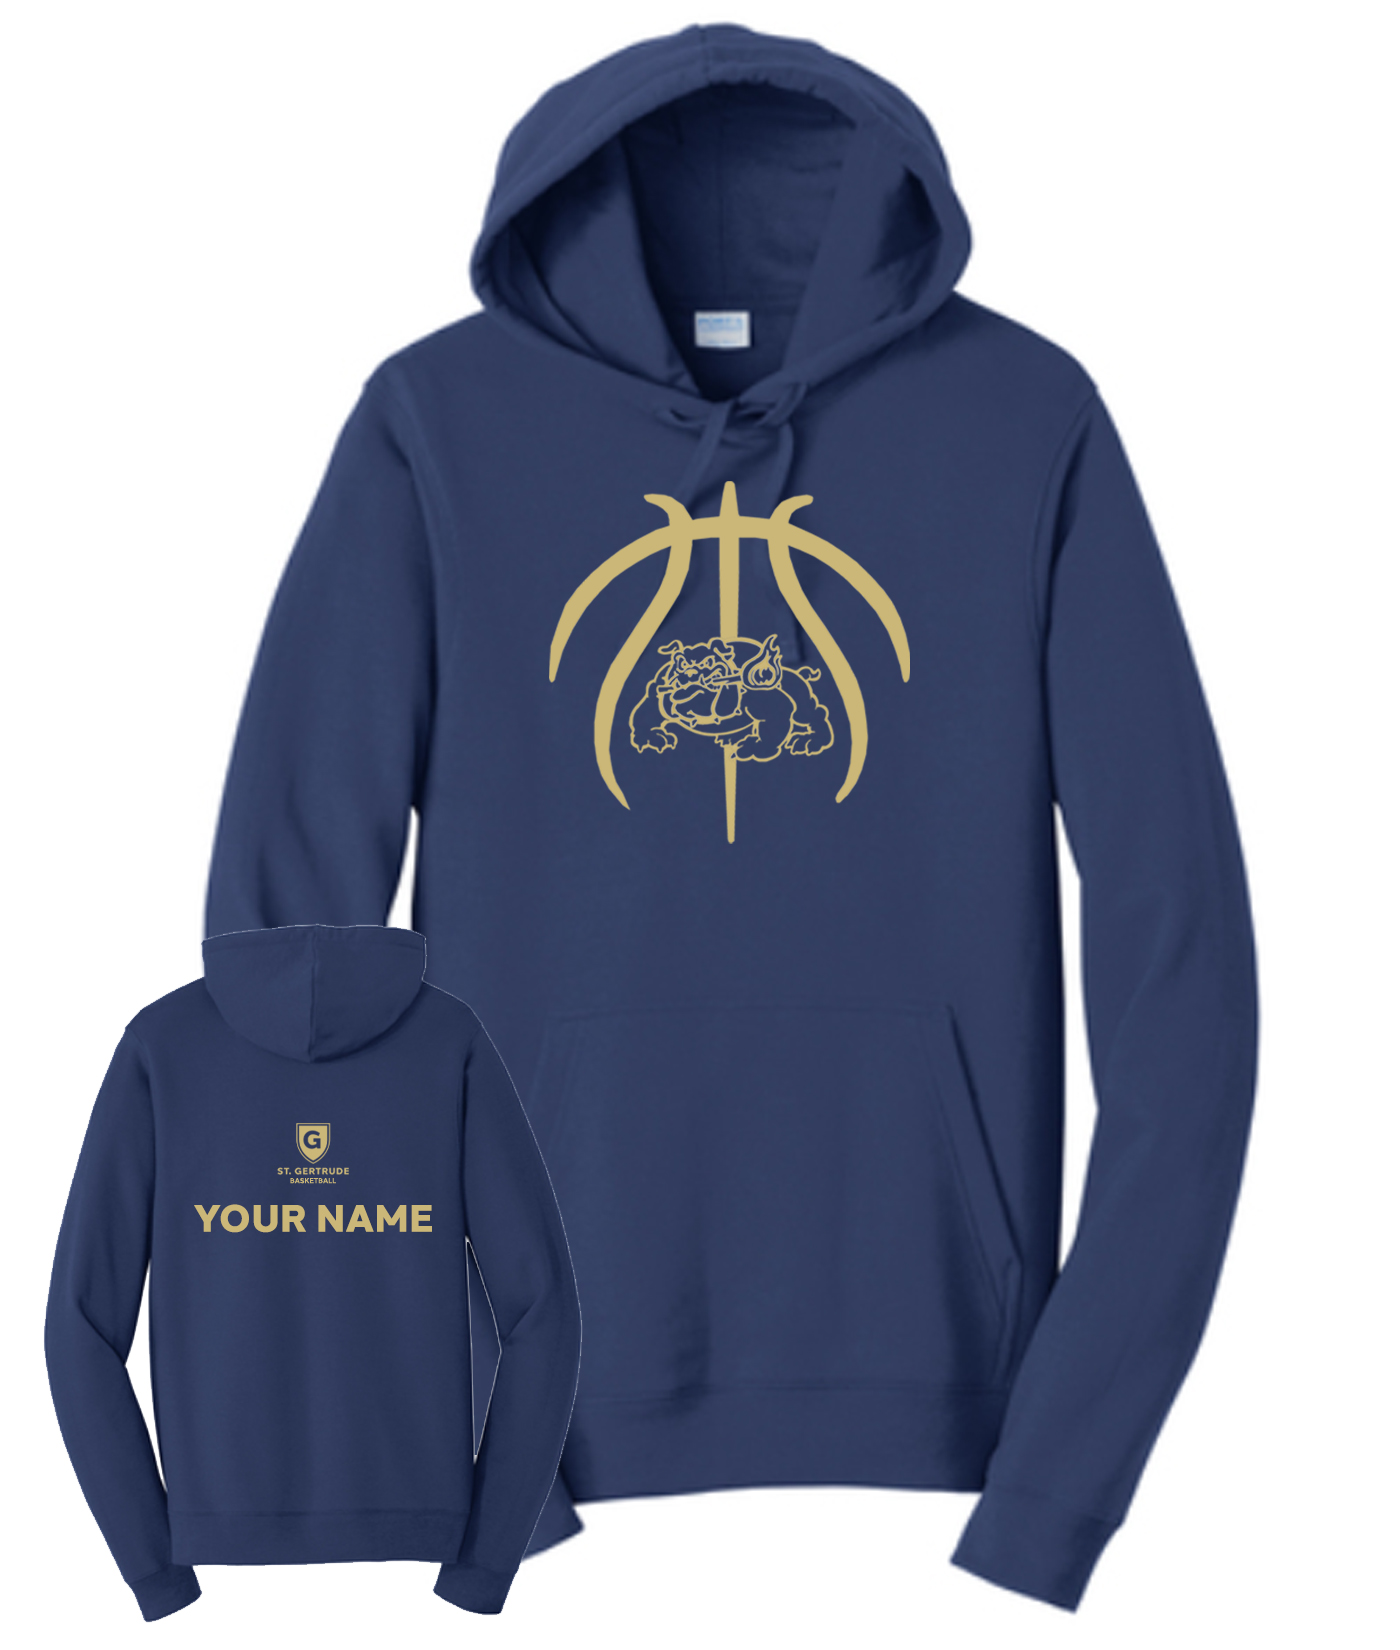 2021 Basketball Warm Up Cotton Hoodie (Mens/Ladies/Youth)